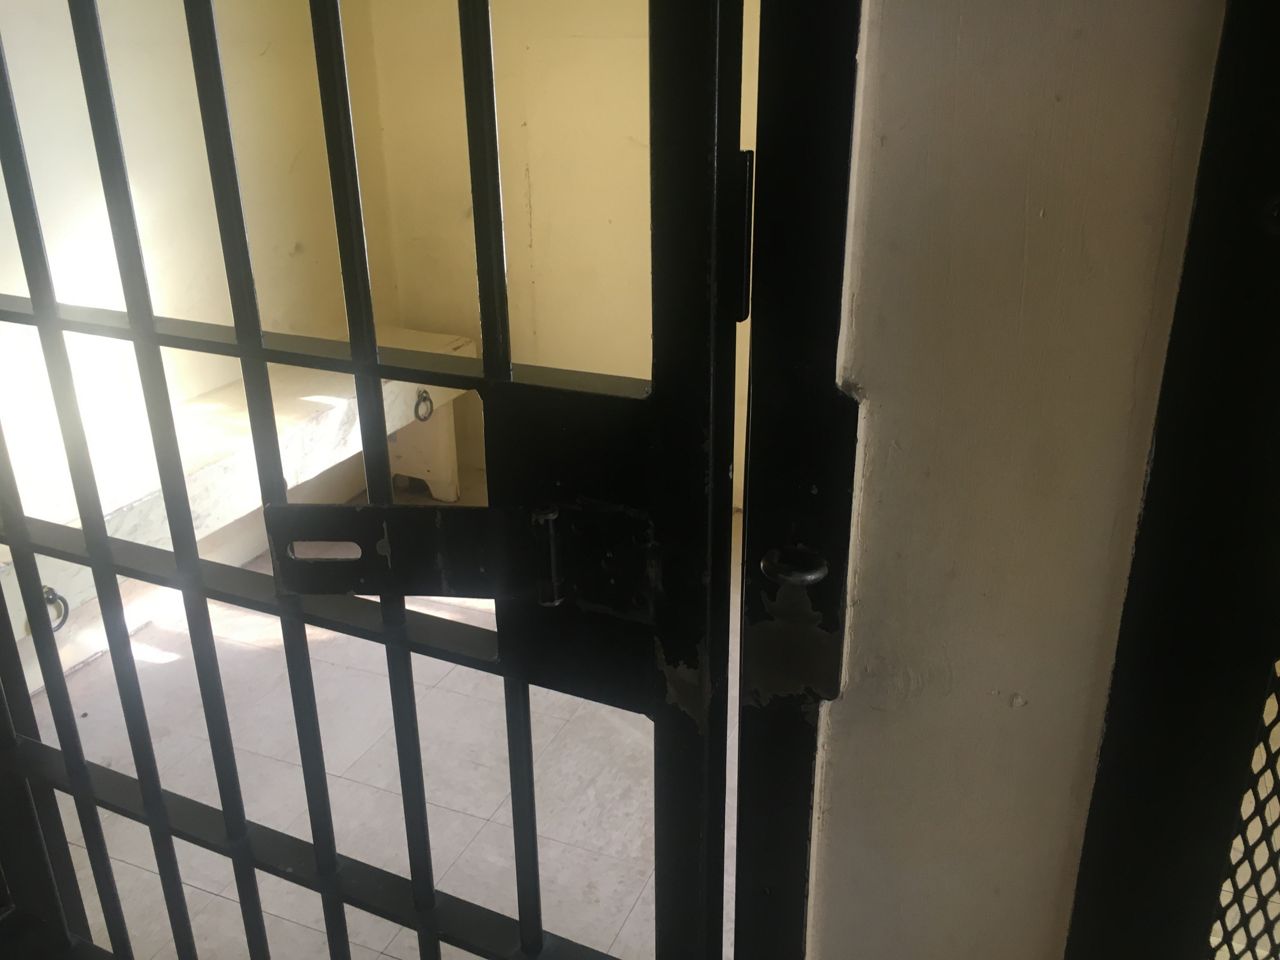 A holding cell inside the Sullivan County Sheriff's Patrol Office